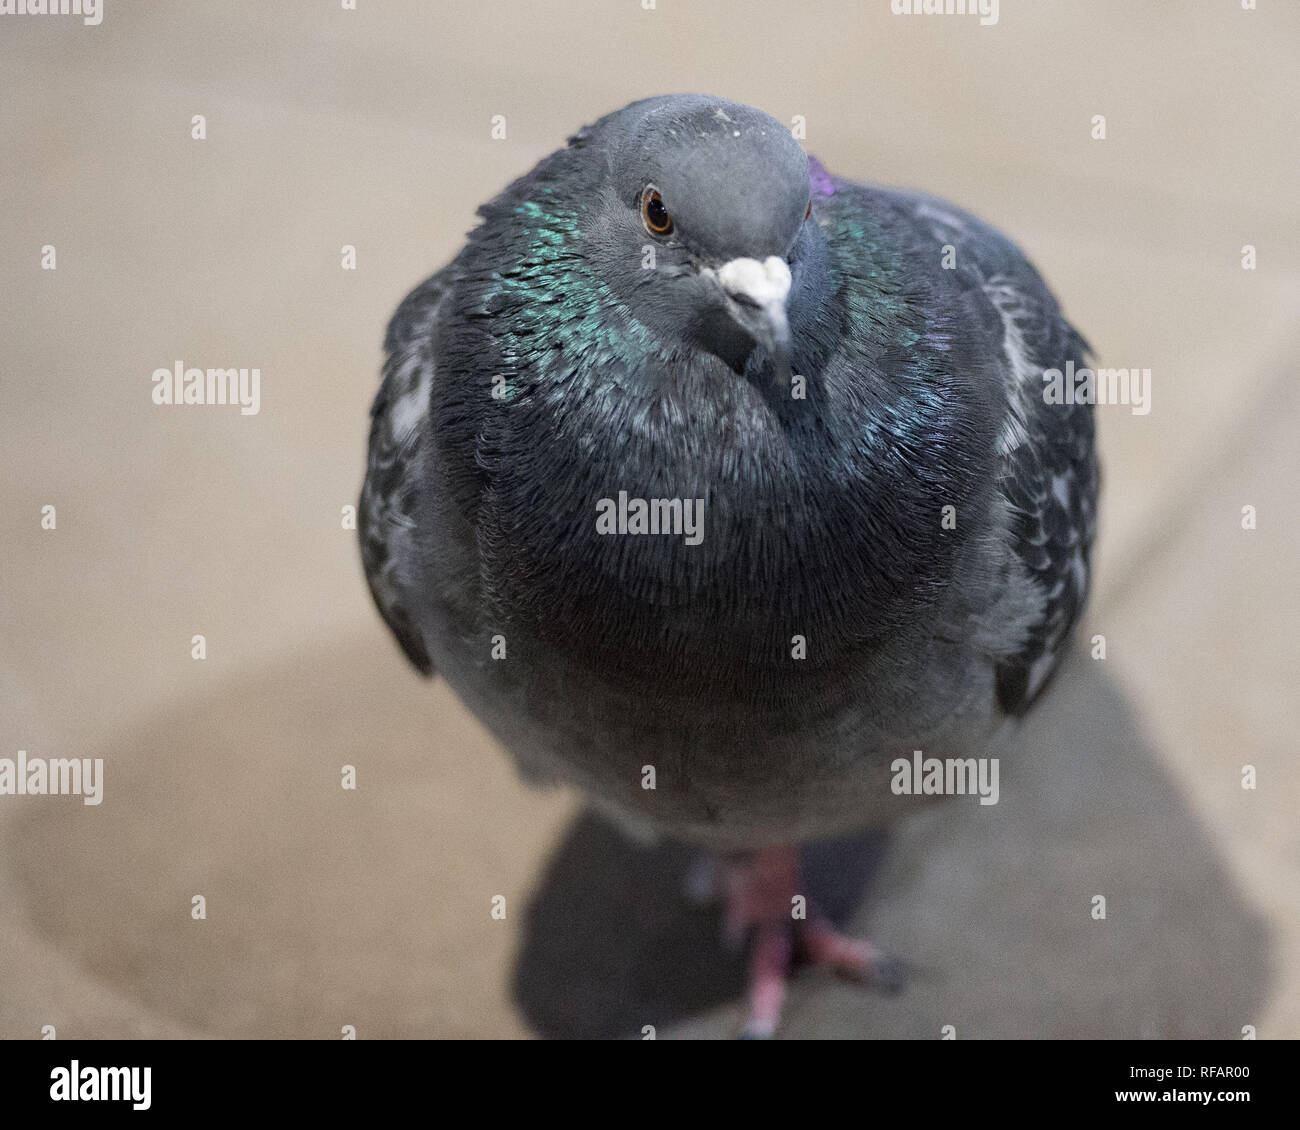 Edinburgh, UK. 23 January 2019.  Residents of Waverley Station - The Pigeon, seen by most as pests and vermin, these common pigeons make the nation their home due to the relative warmer temperatures inside the protective canopy away from the element, and an abundance of food left by the tens of thousands of travellers which pass through this interchange on a daily basis. Credit: Colin Fisher/Alamy Live News Stock Photo